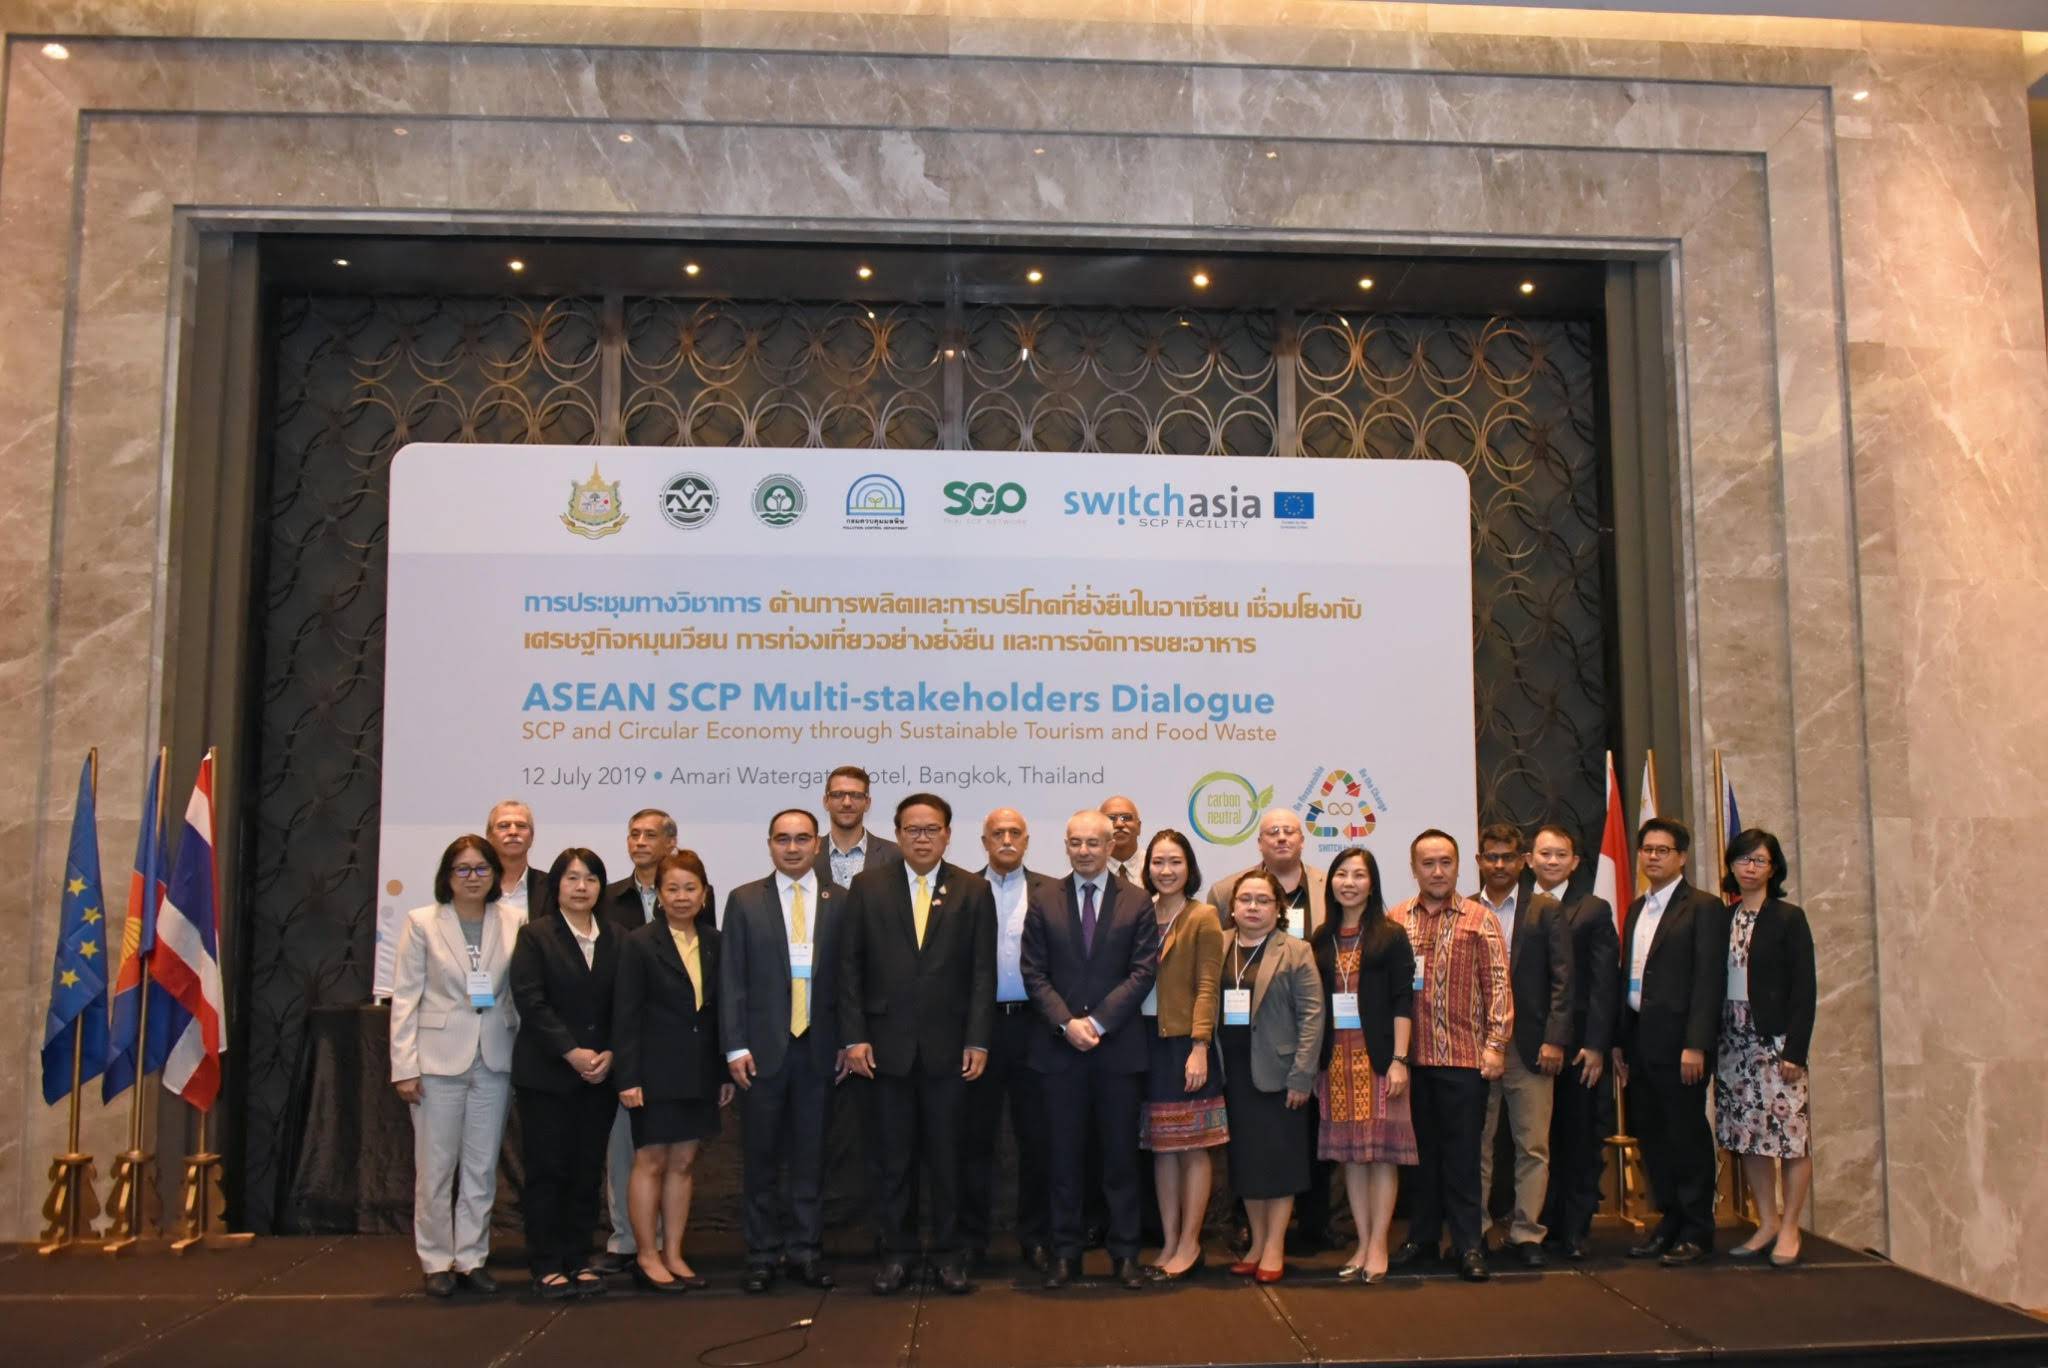 ASEAN SCP Multi-stakeholders Dialogue